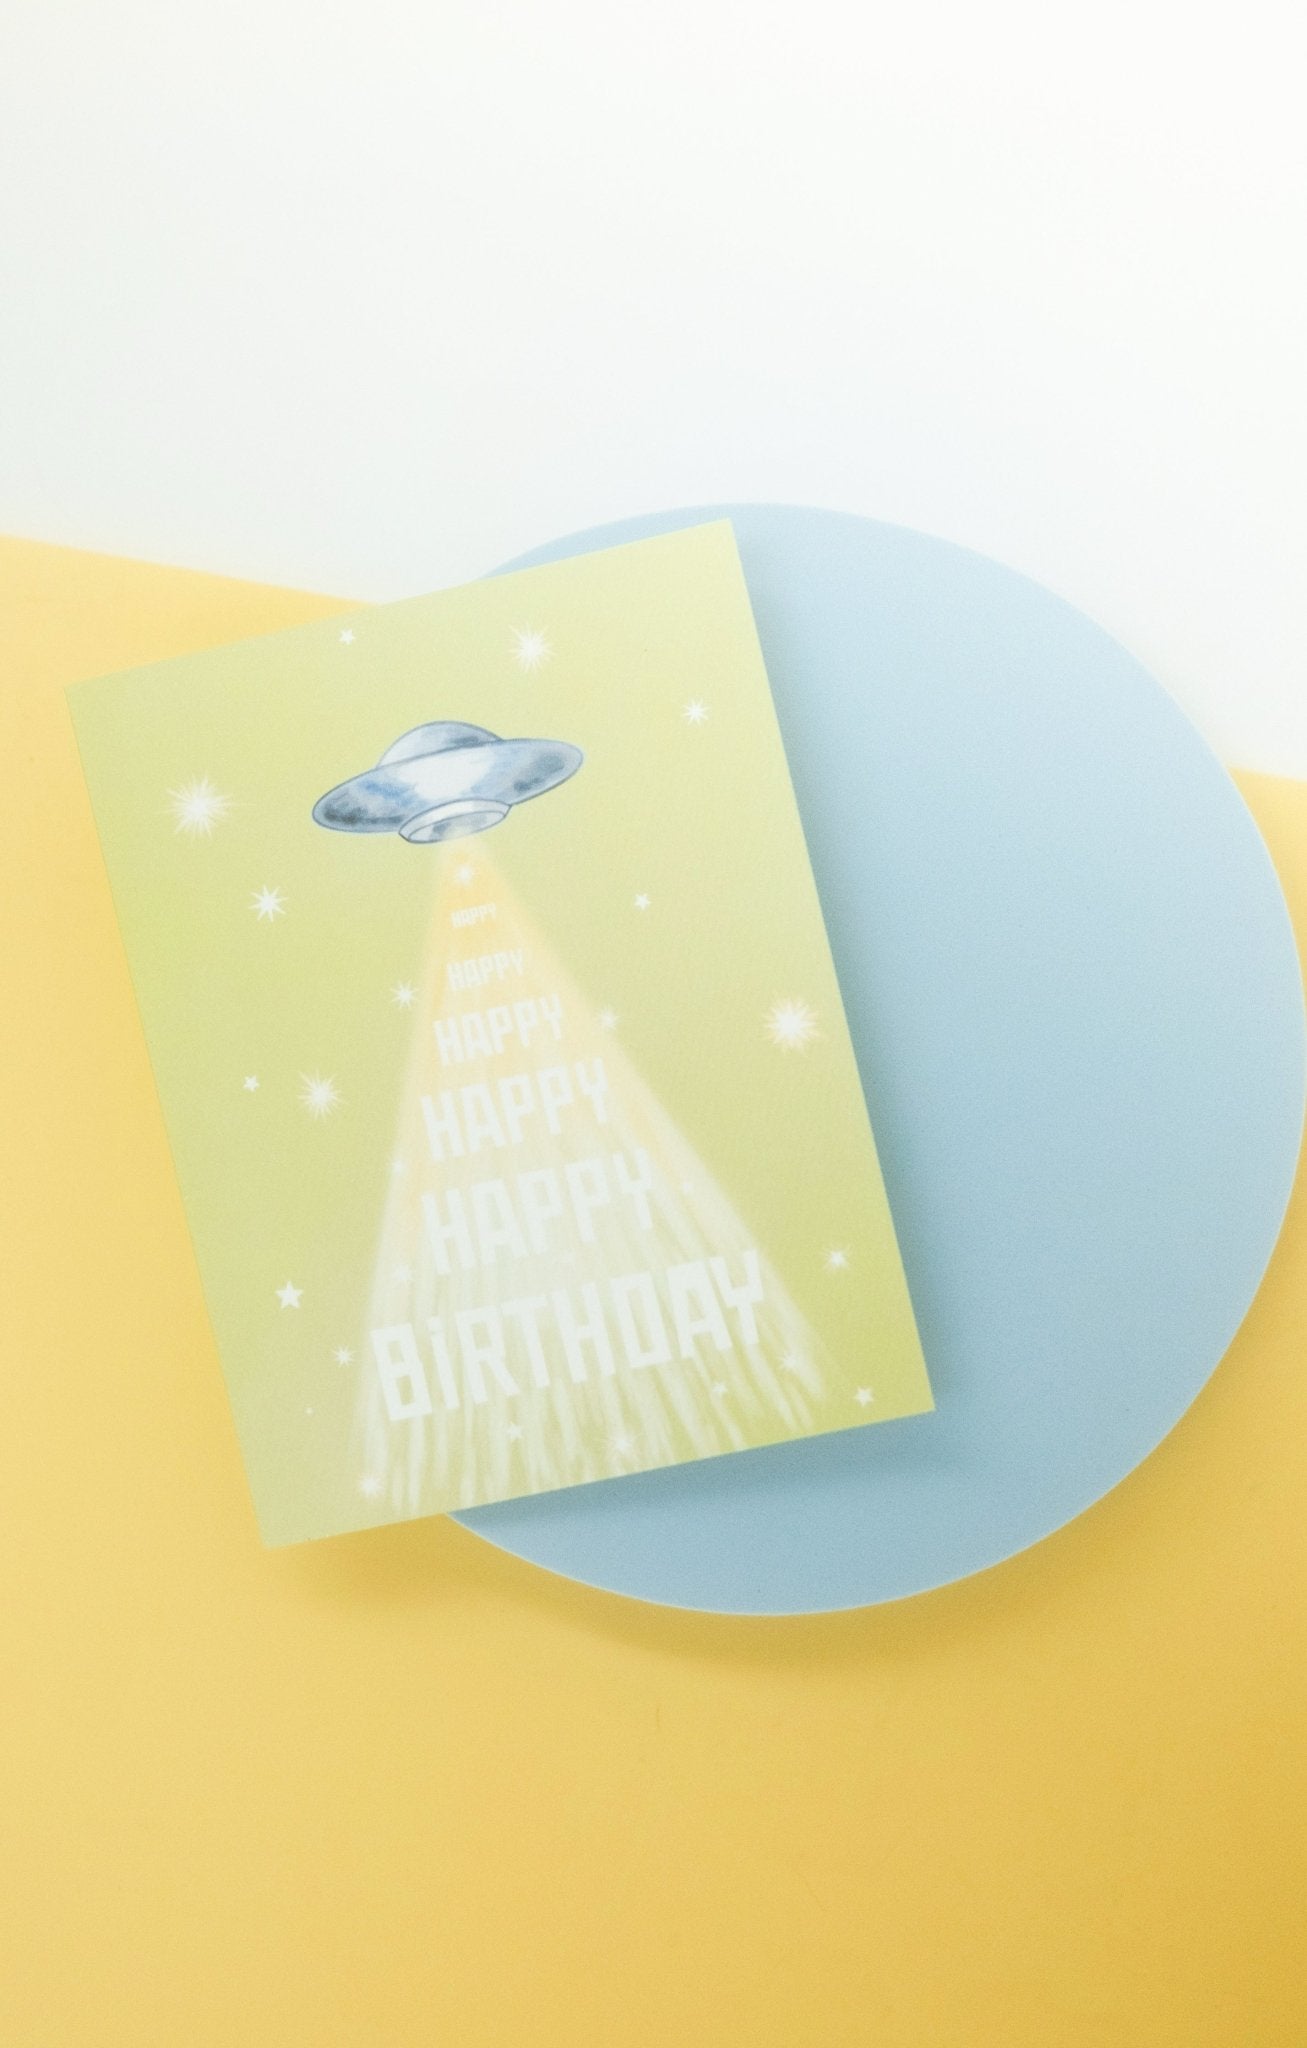 Greeting card with green background featuring stars and flying saucer with &quot;happy birthday&quot; printed down the front. Shown on blue platform with green and white background.